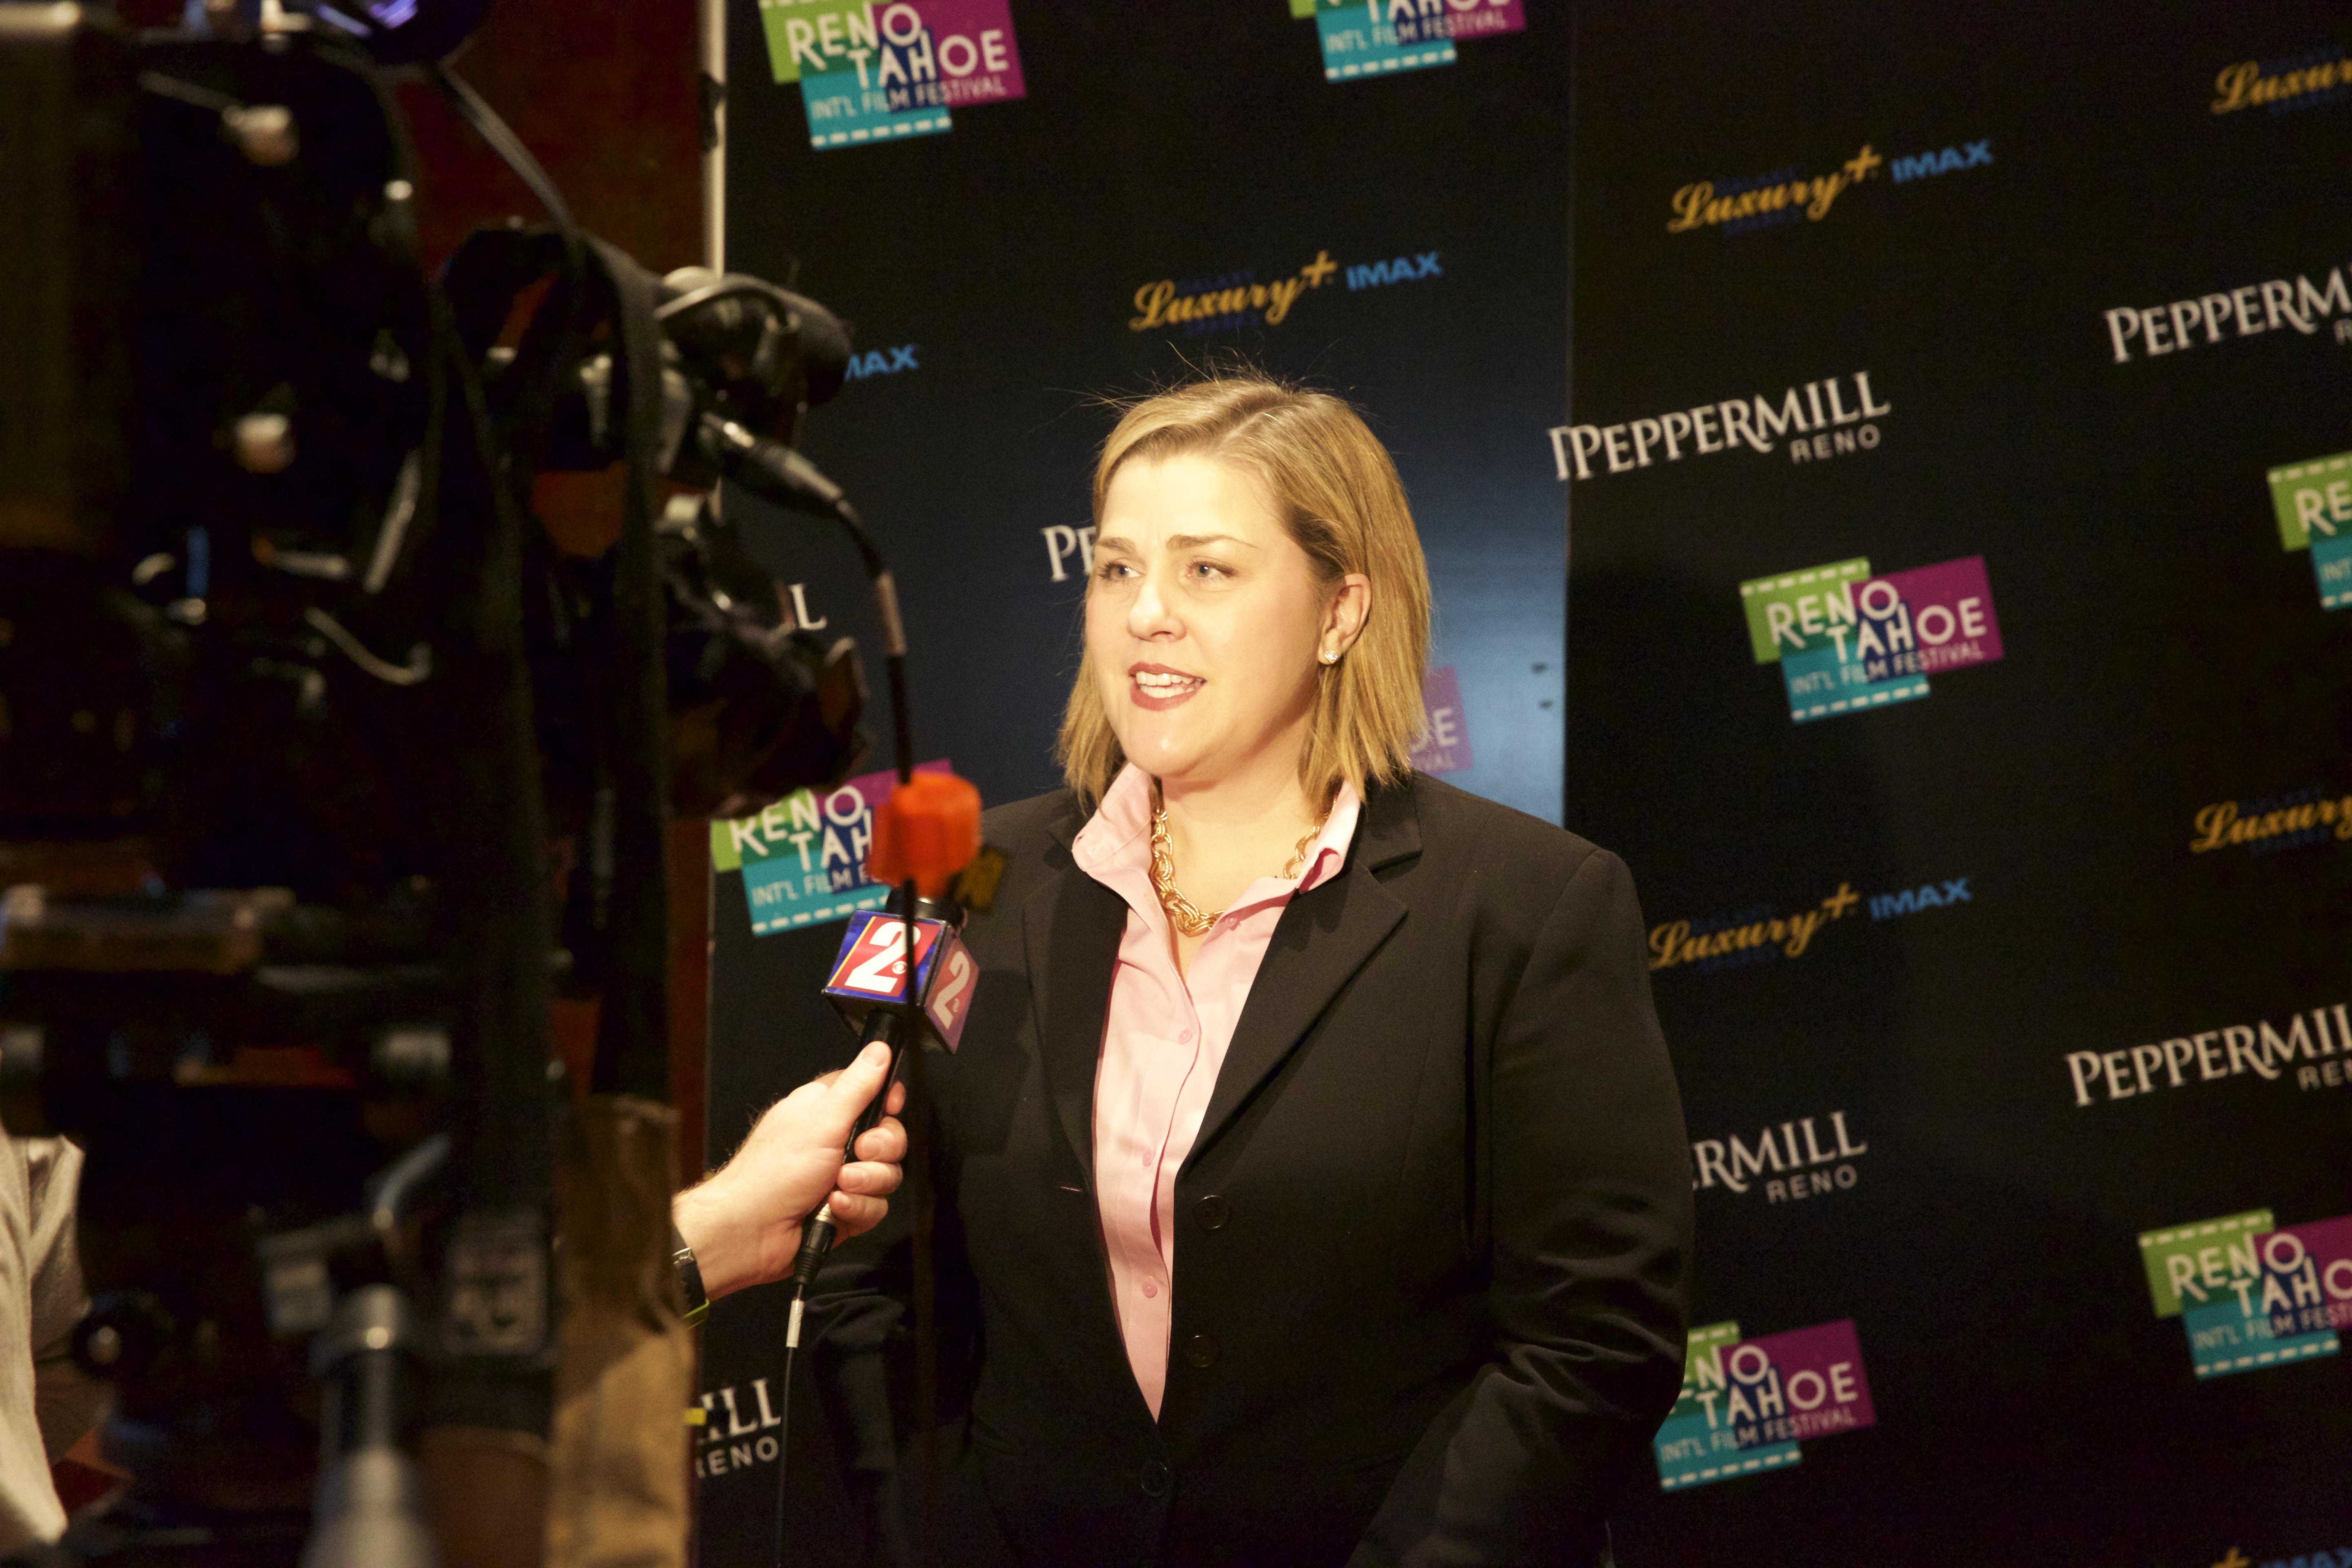 Founder /Executive Director of the Reno Tahoe Film Society, Chayah Masters, shares her thoughts on the inaugural Reno Tahoe Int'l Film Festival coming in June 2015. RTIFF.org